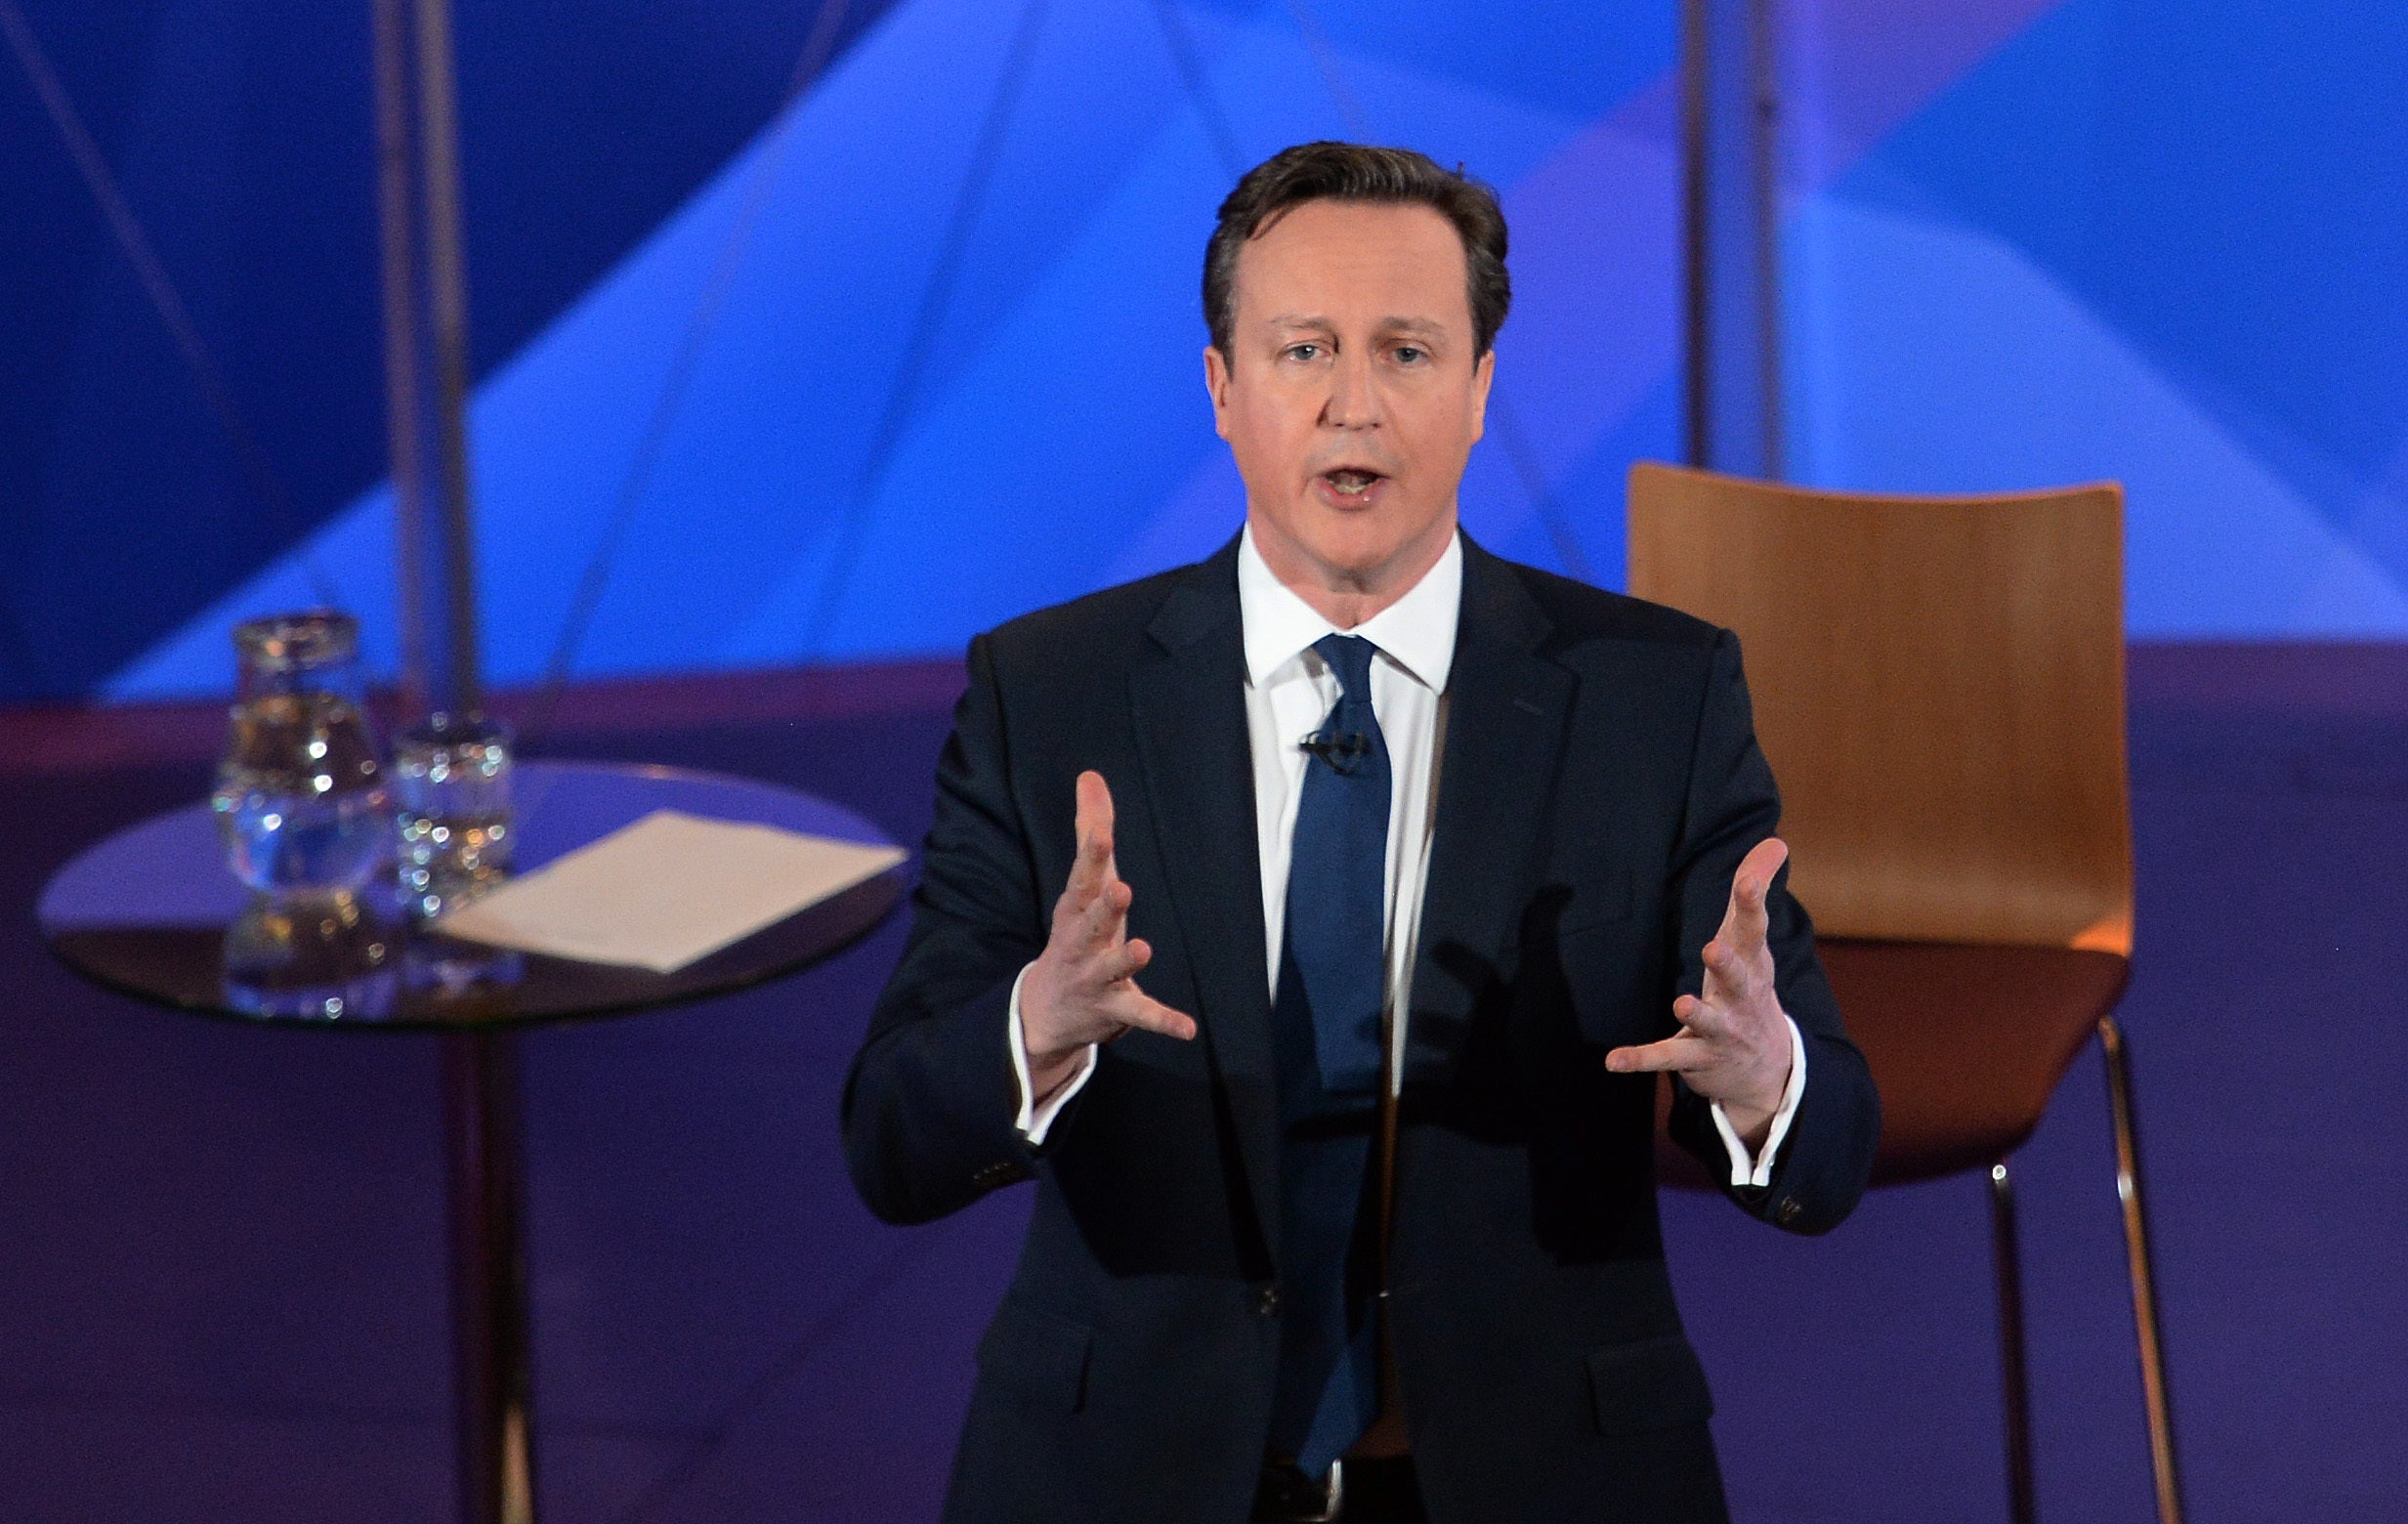 David Cameron said holding a EU referendum was a 'red line' for him in any coalition negotiations